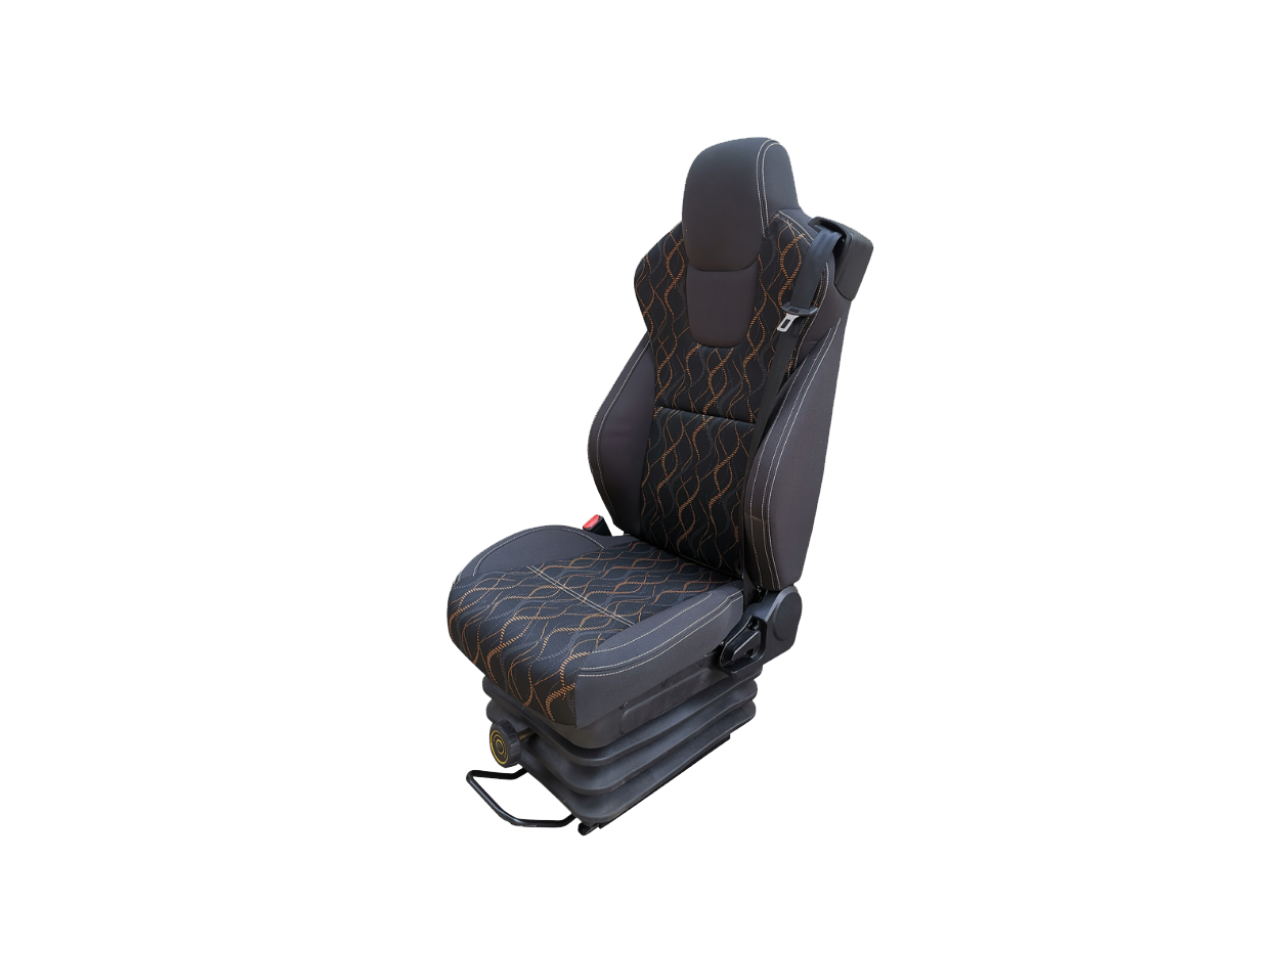 YTS01C Driver Seat with Mechanical Shock Absorber